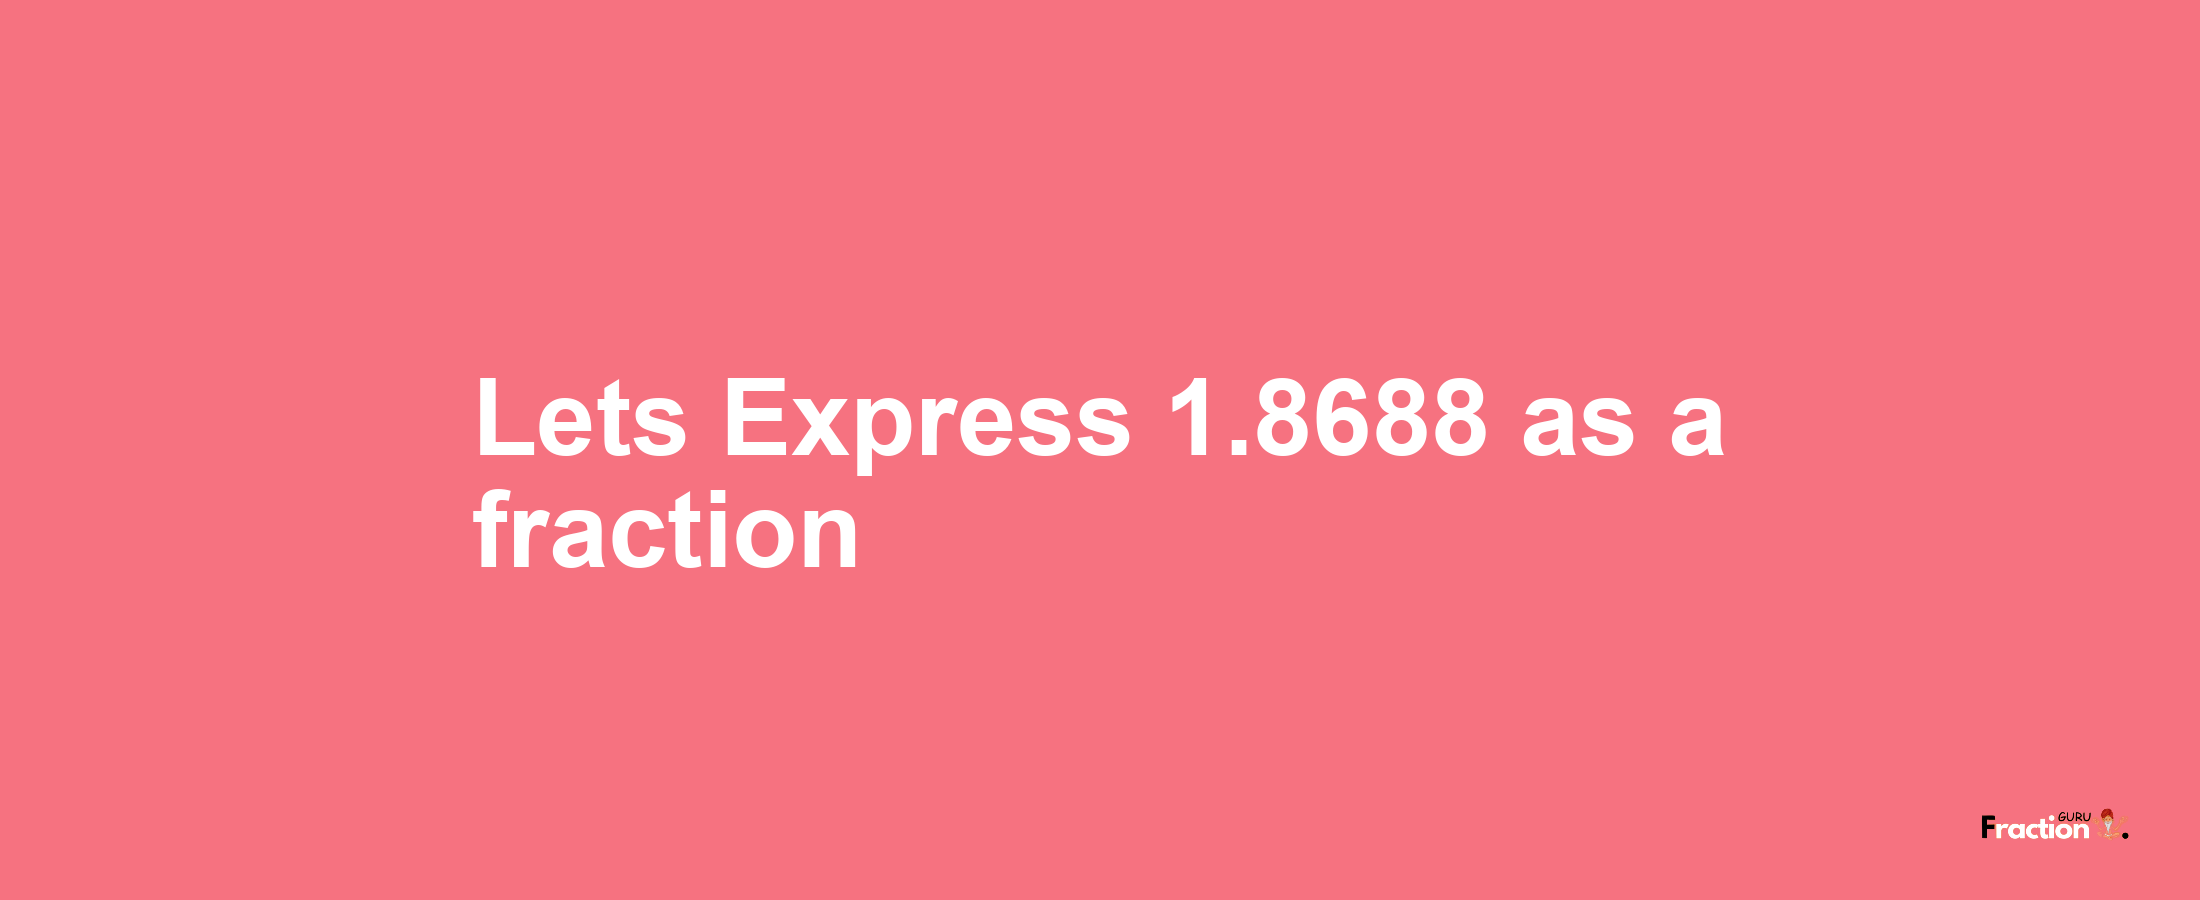 Lets Express 1.8688 as afraction